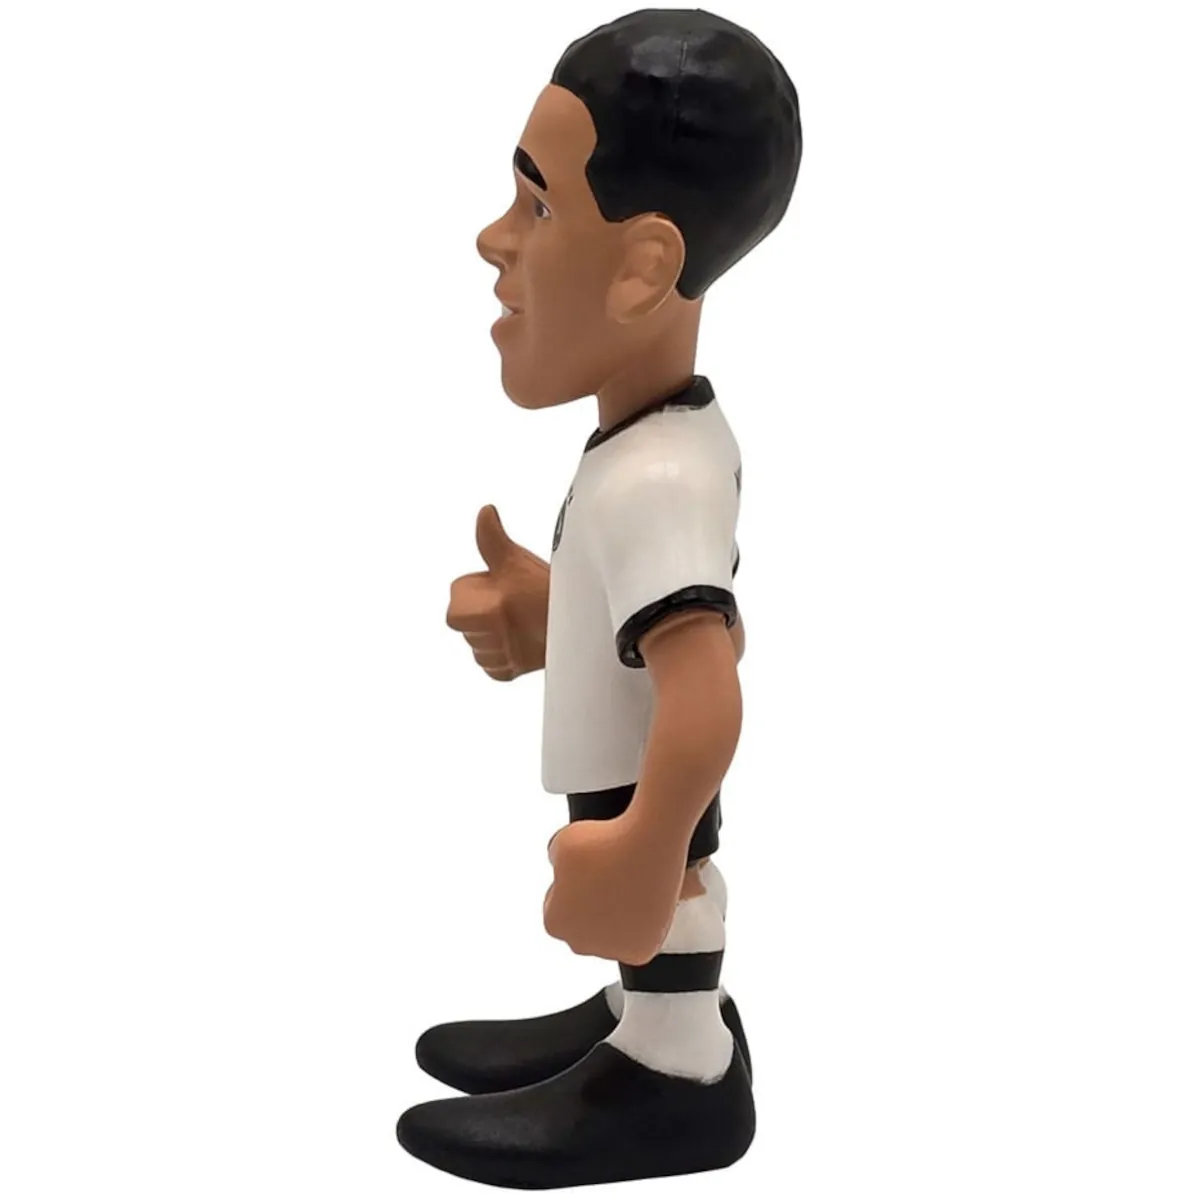 MN15191 Jamal Musiala (Germany Men's National Team) 12cm MINIX Collectable Figure 2